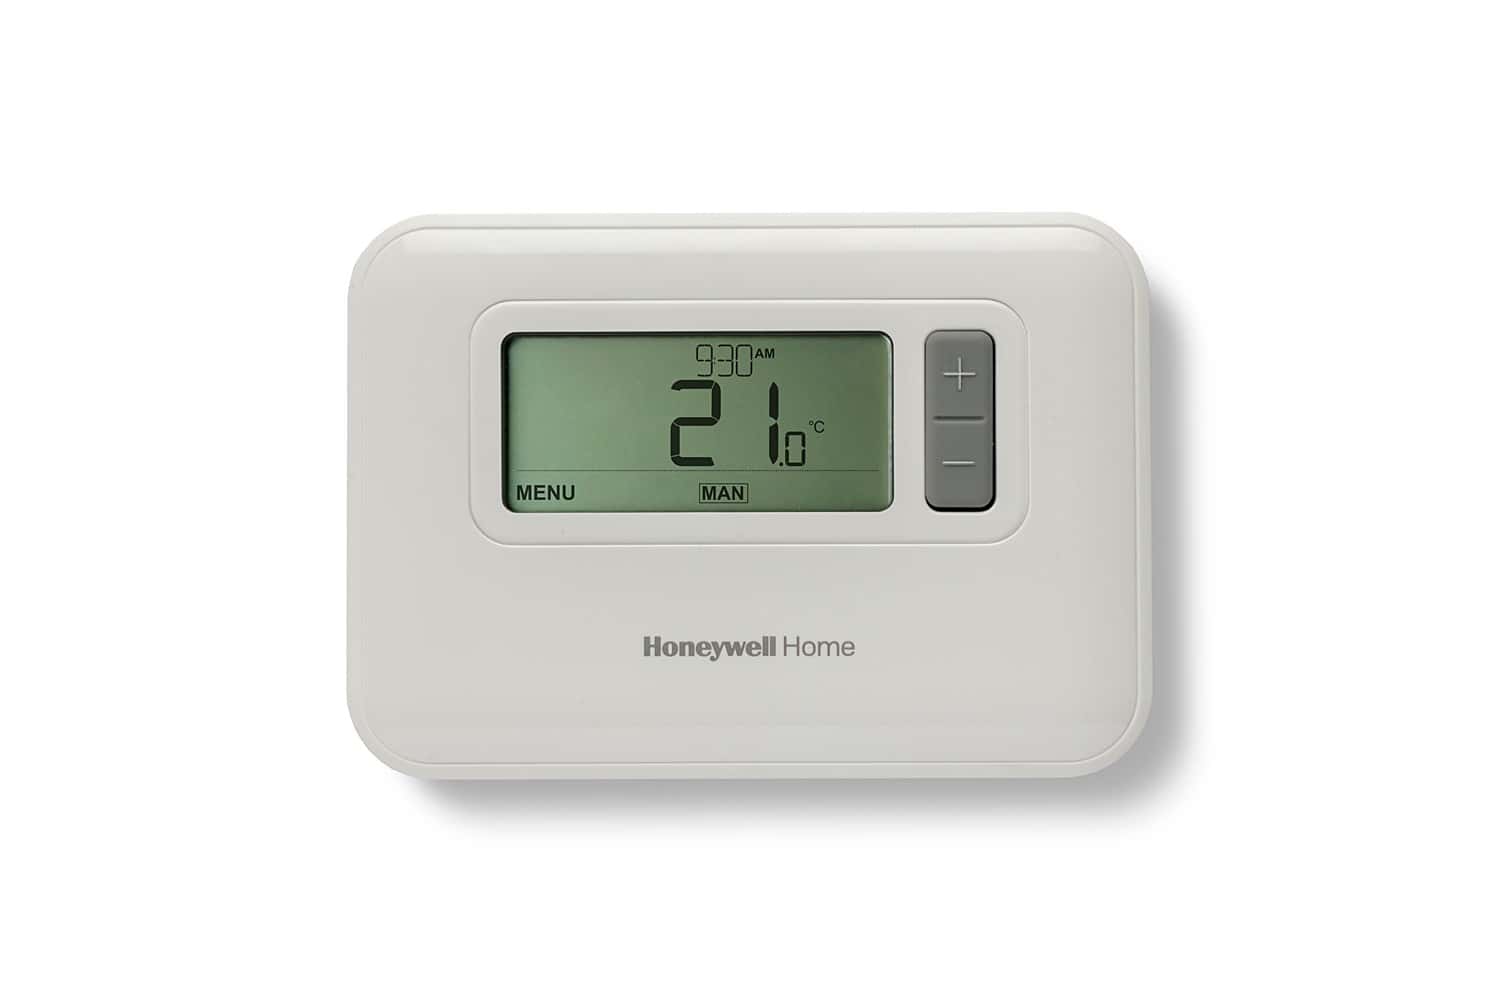 Thermostat programmable filaire pour chauffage ou climatisation